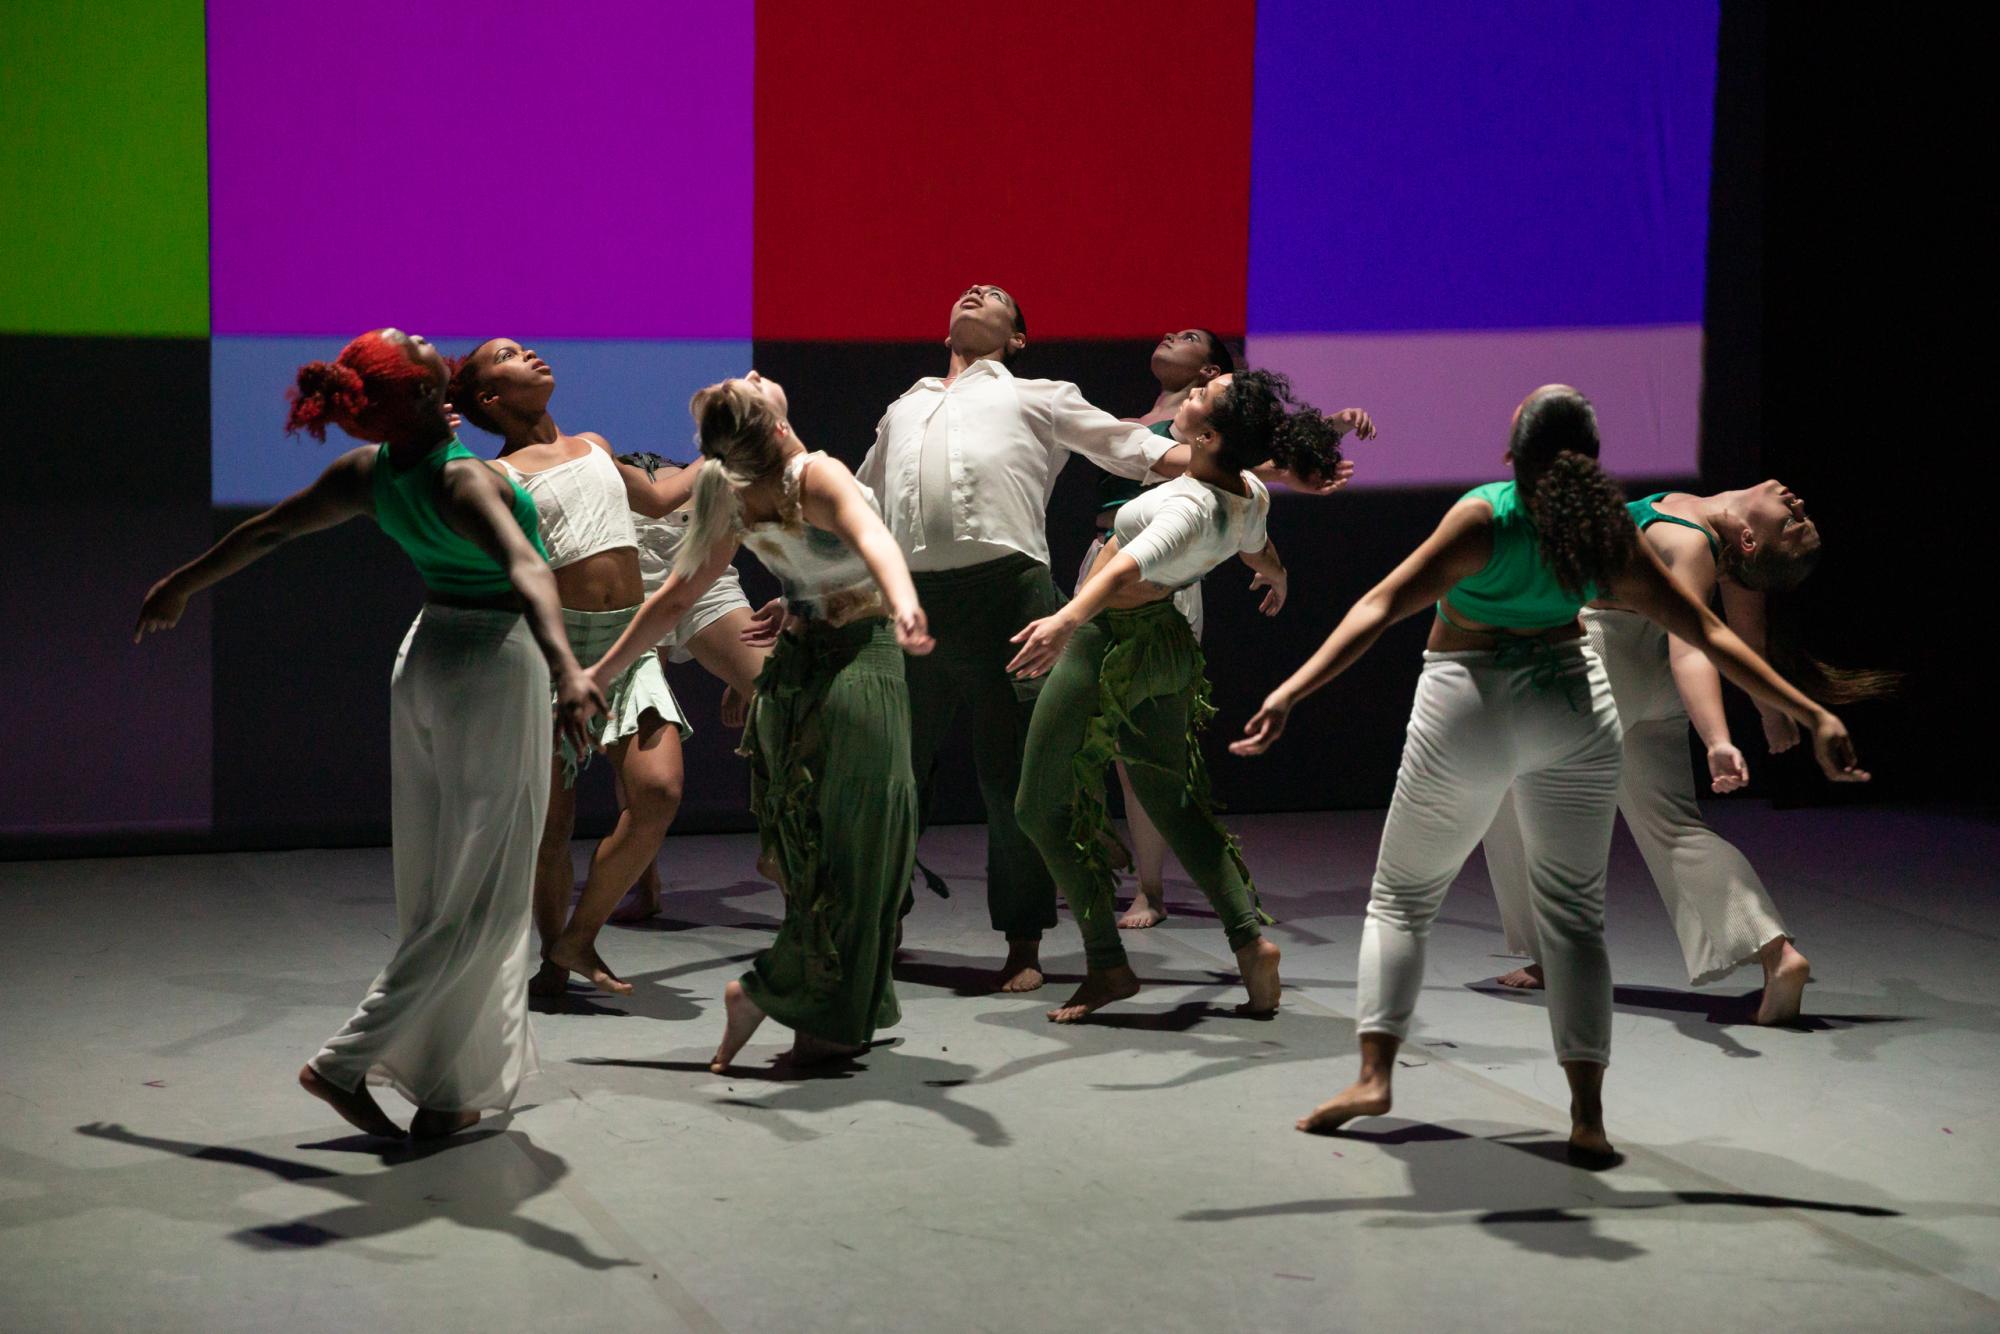 Dancers look up, leaning back with their arm outstretched against a technicolor backdrop